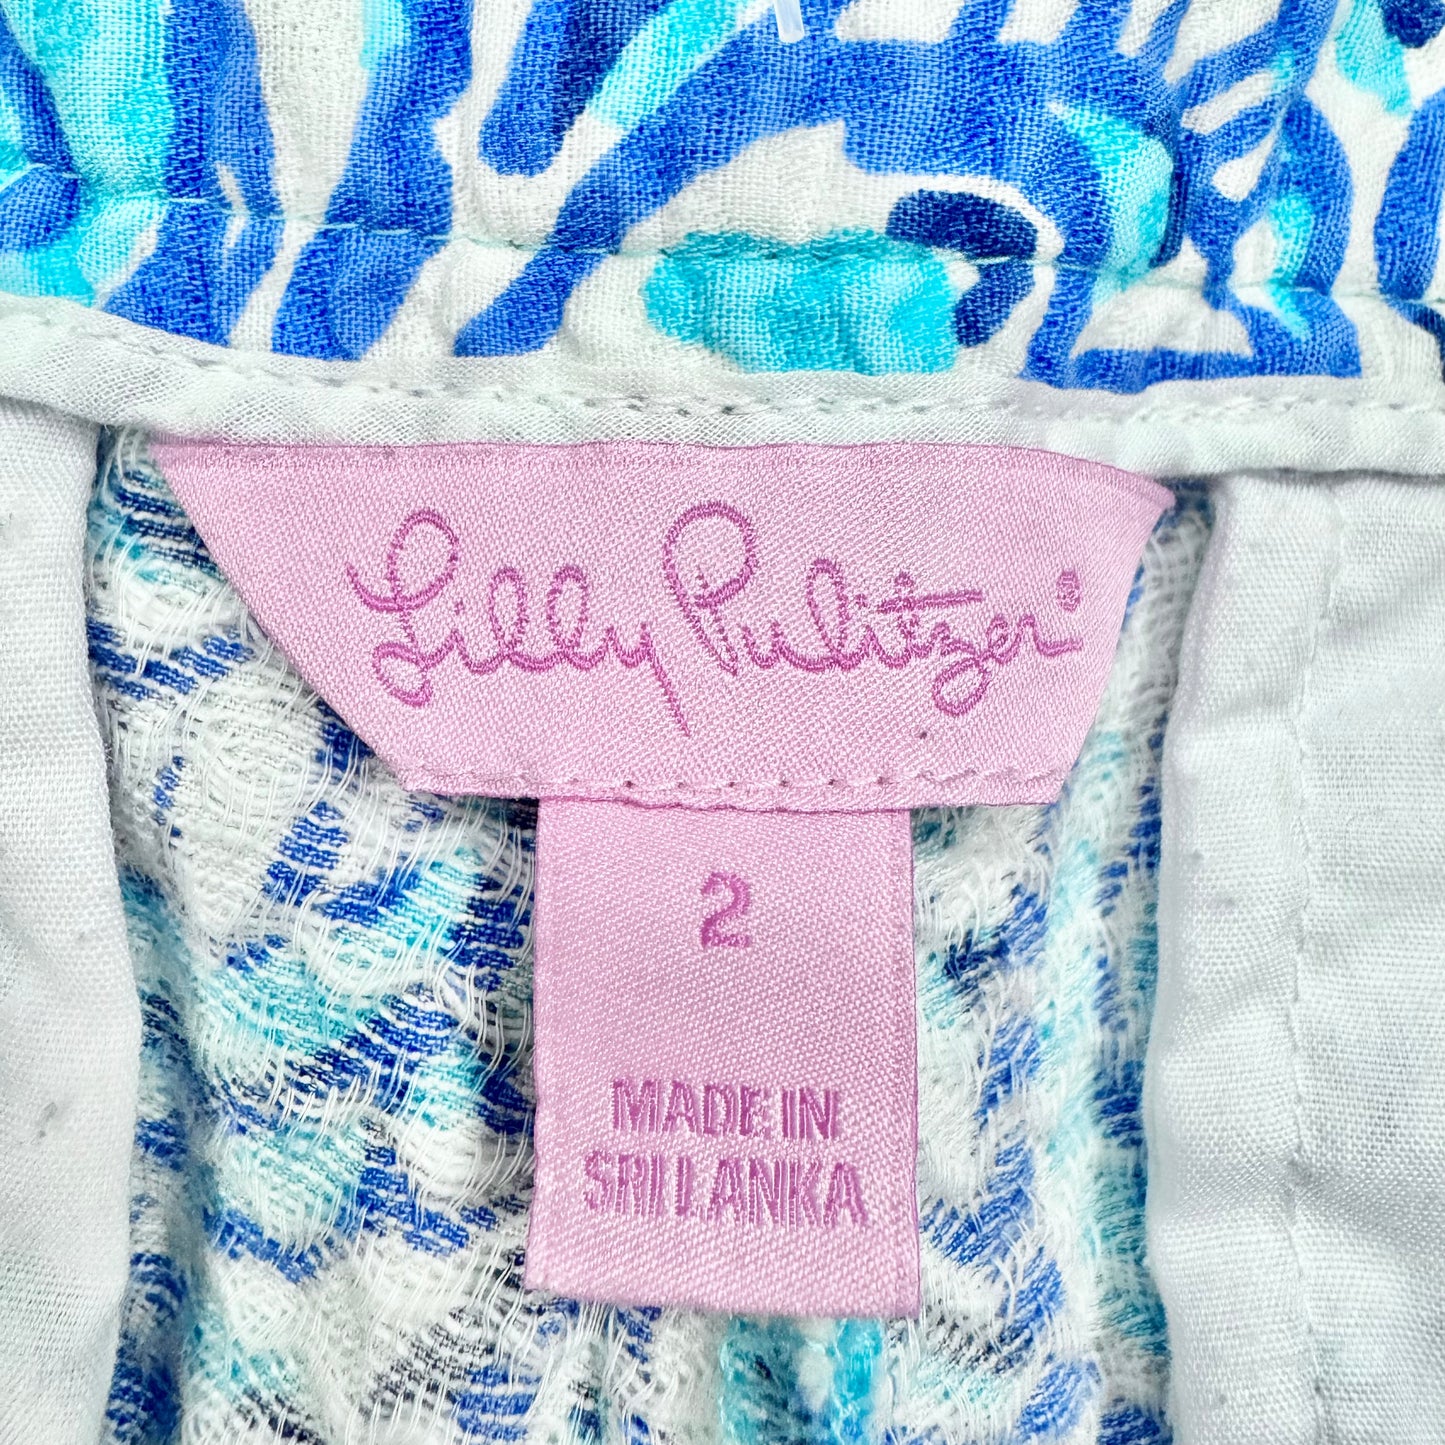 Shorts Designer By Lilly Pulitzer  Size: 2